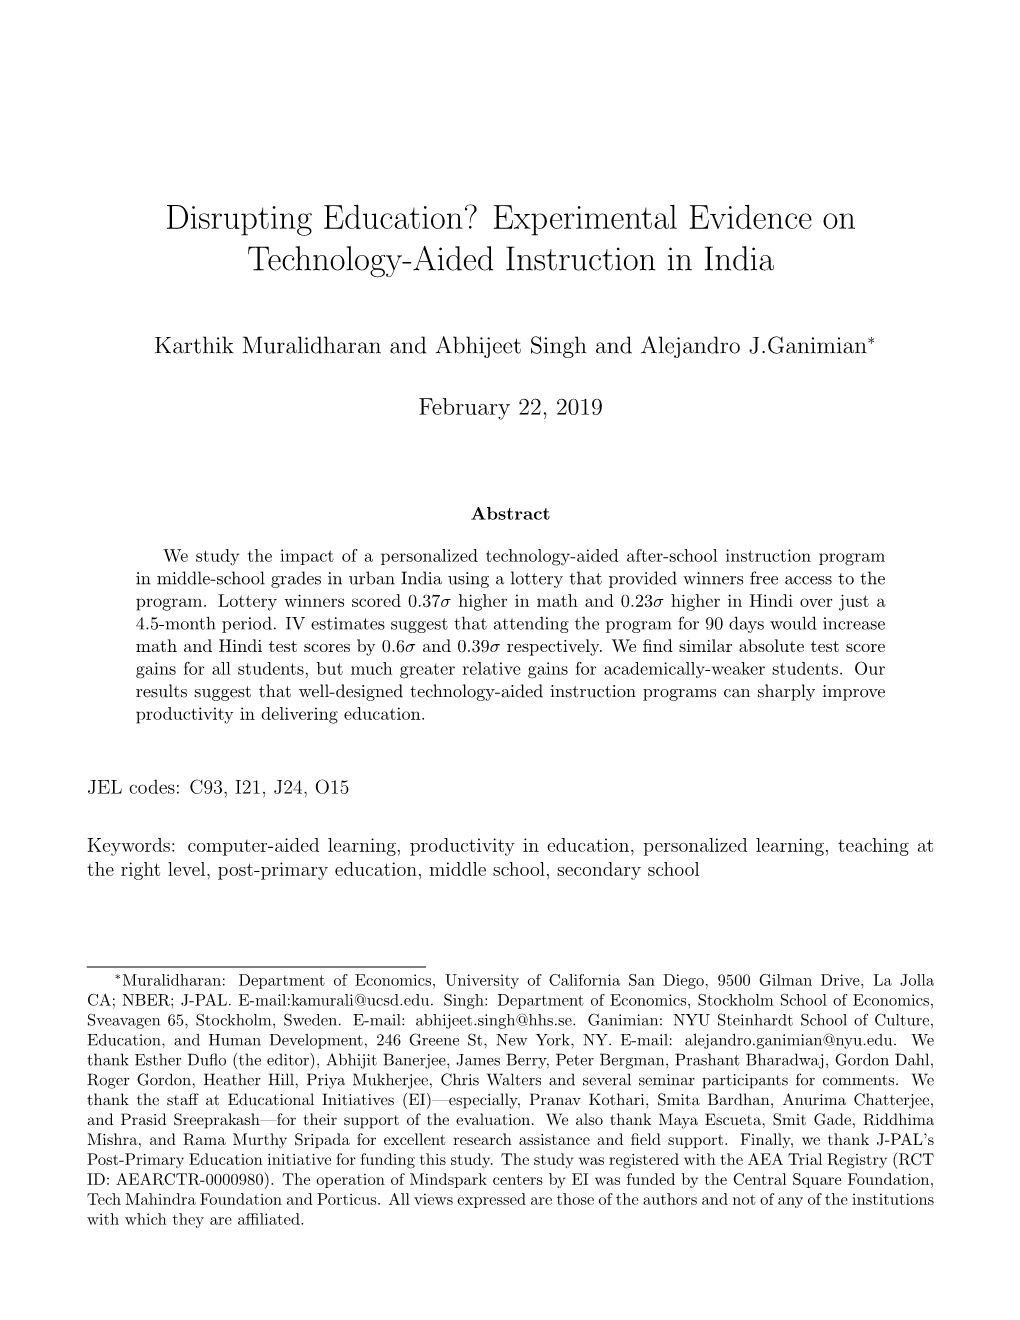 Experimental Evidence on Technology-Aided Instruction in India